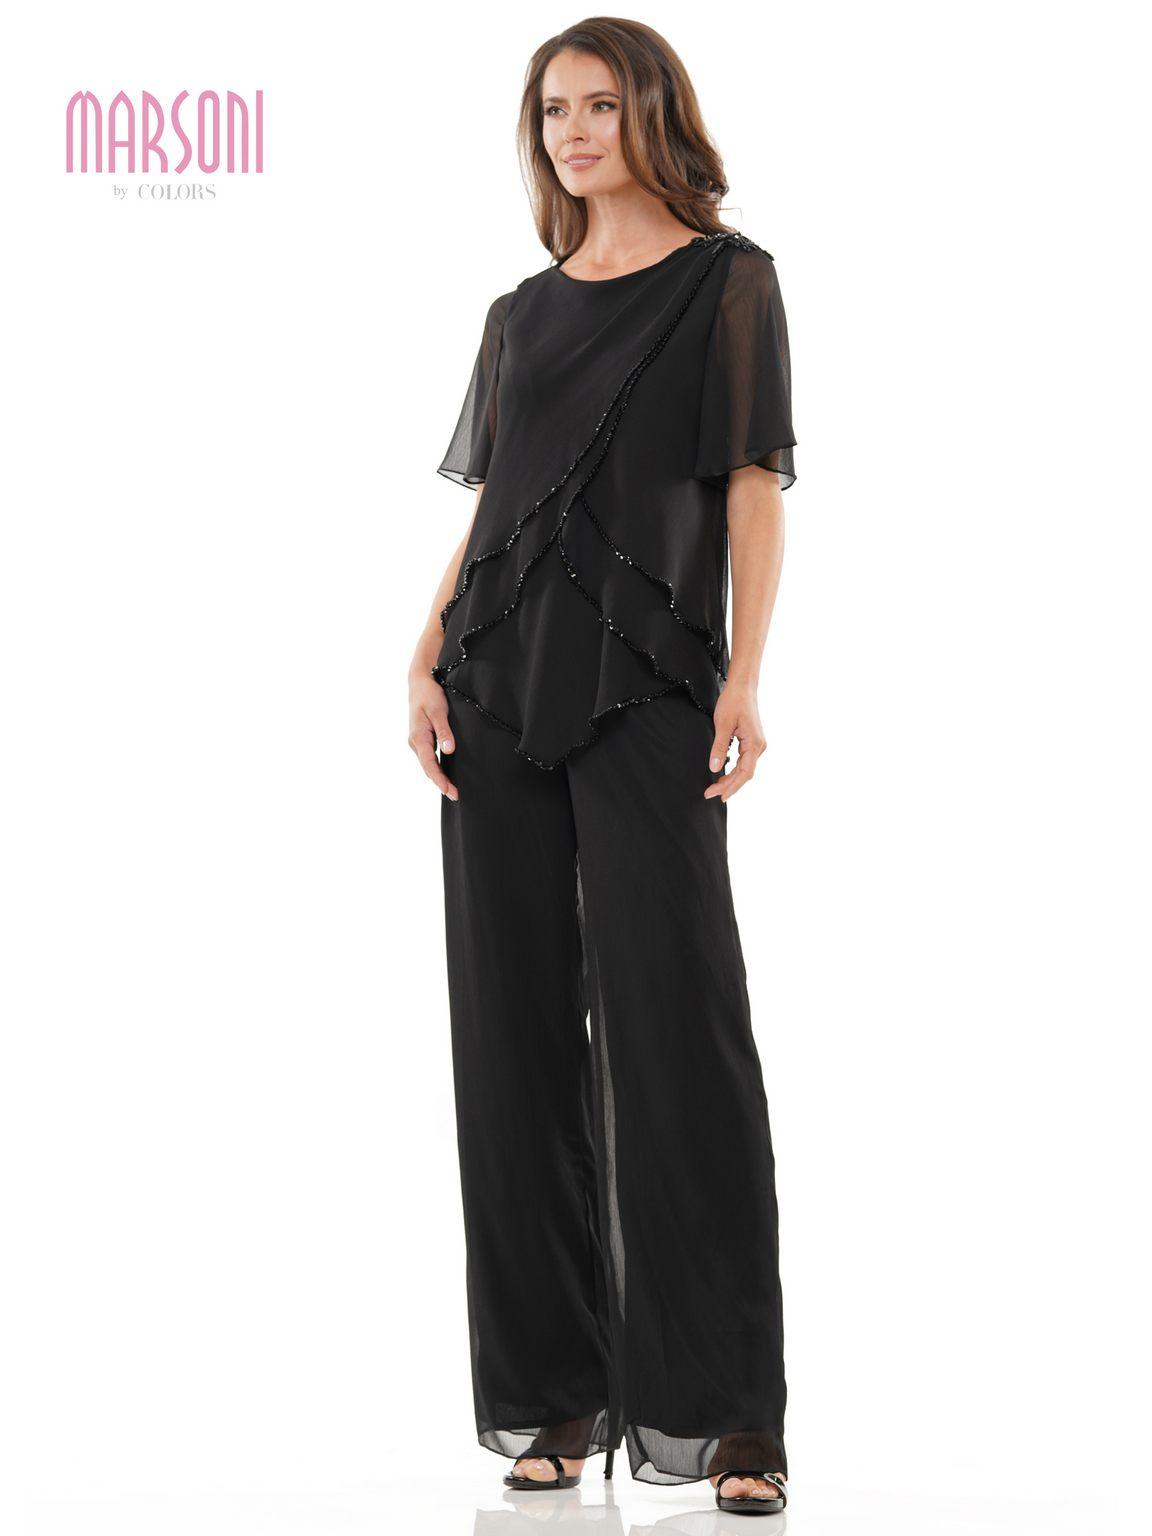 Marsoni Formal Mother of the Bride Pant Suit M321 for $327.99 – The ...